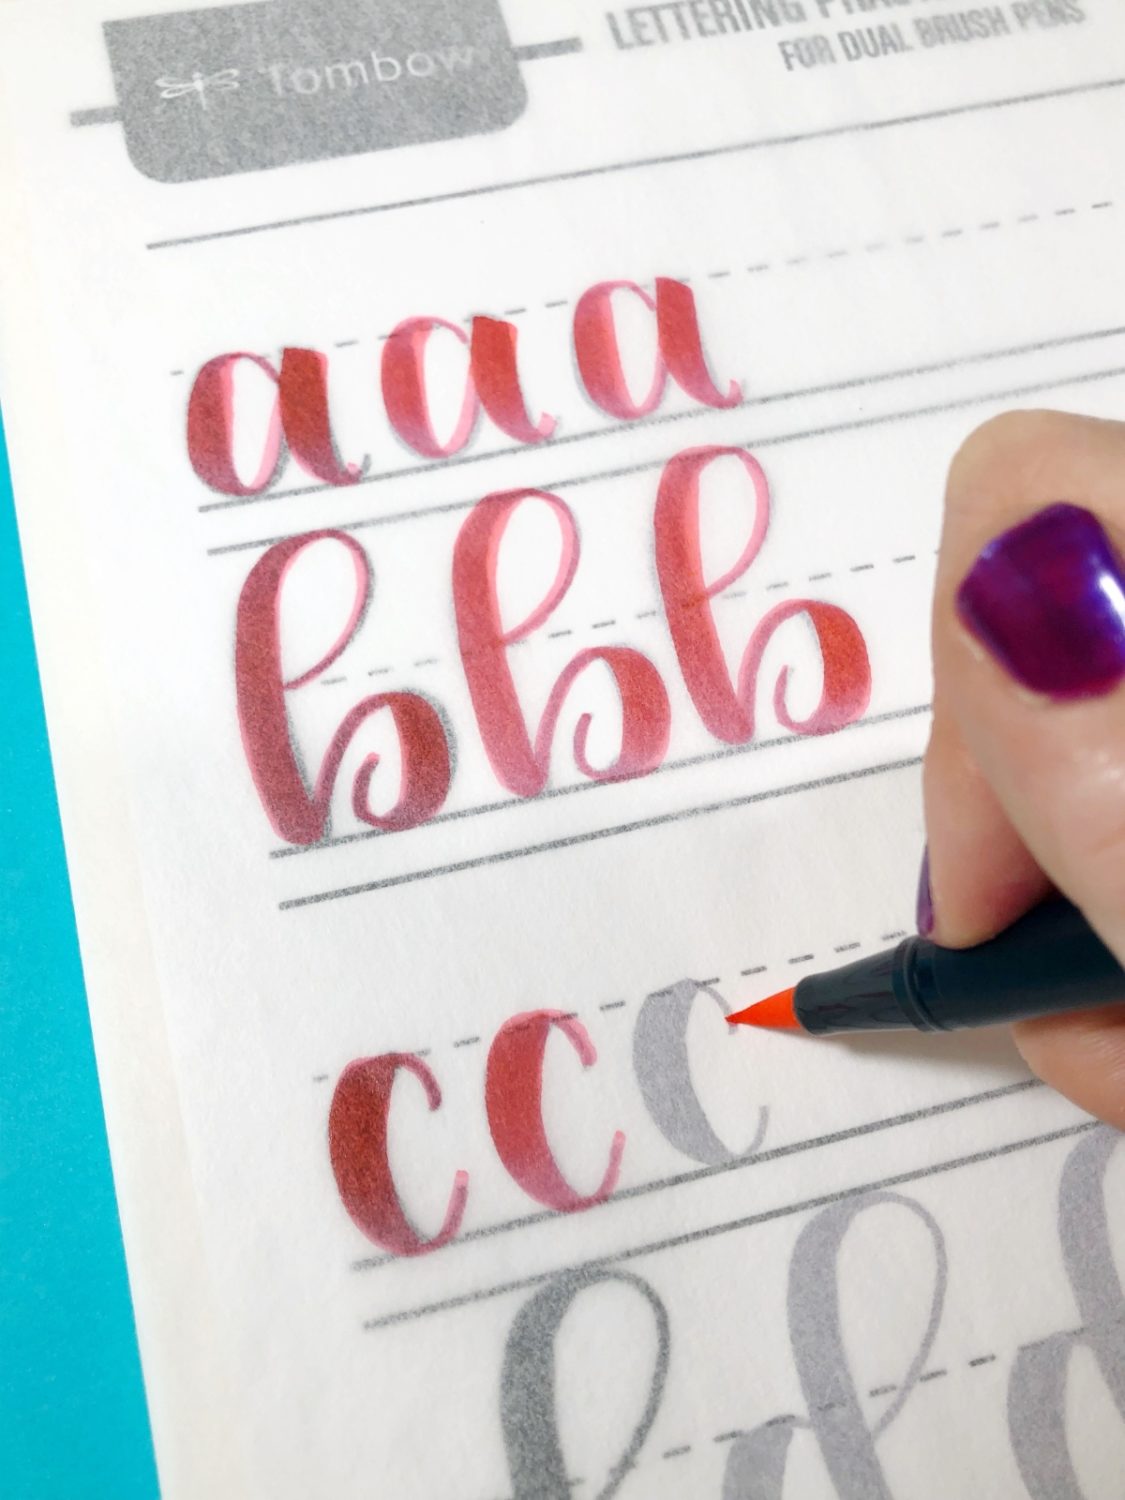 Building Lettering Confidence with Tombow and Tracing Paper - Tombow ...